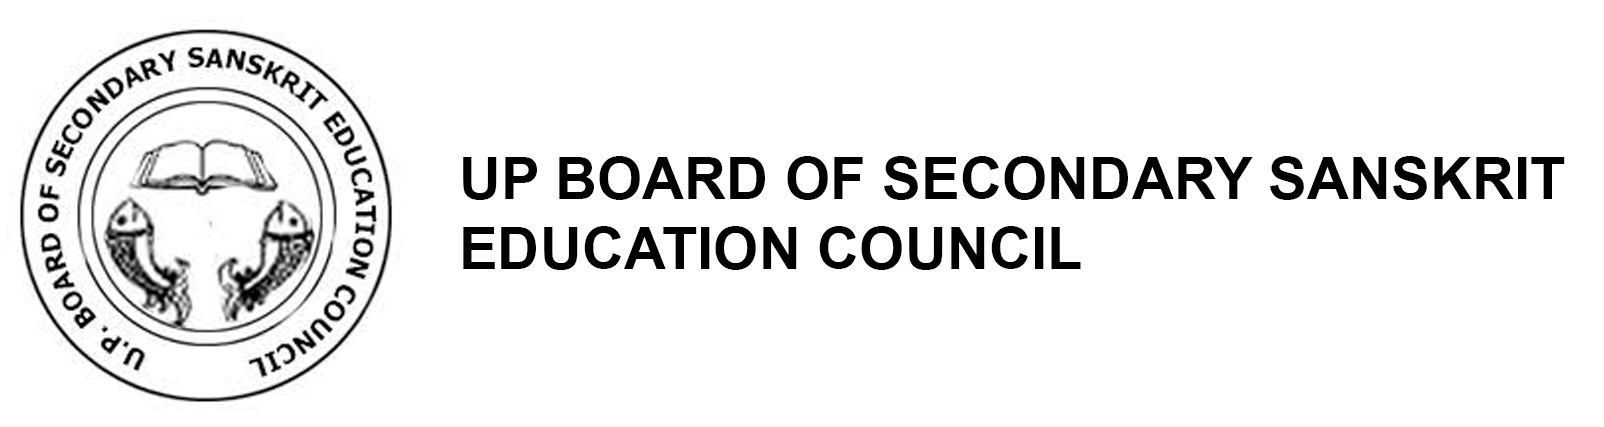 up board of secondary sanskrit
education council